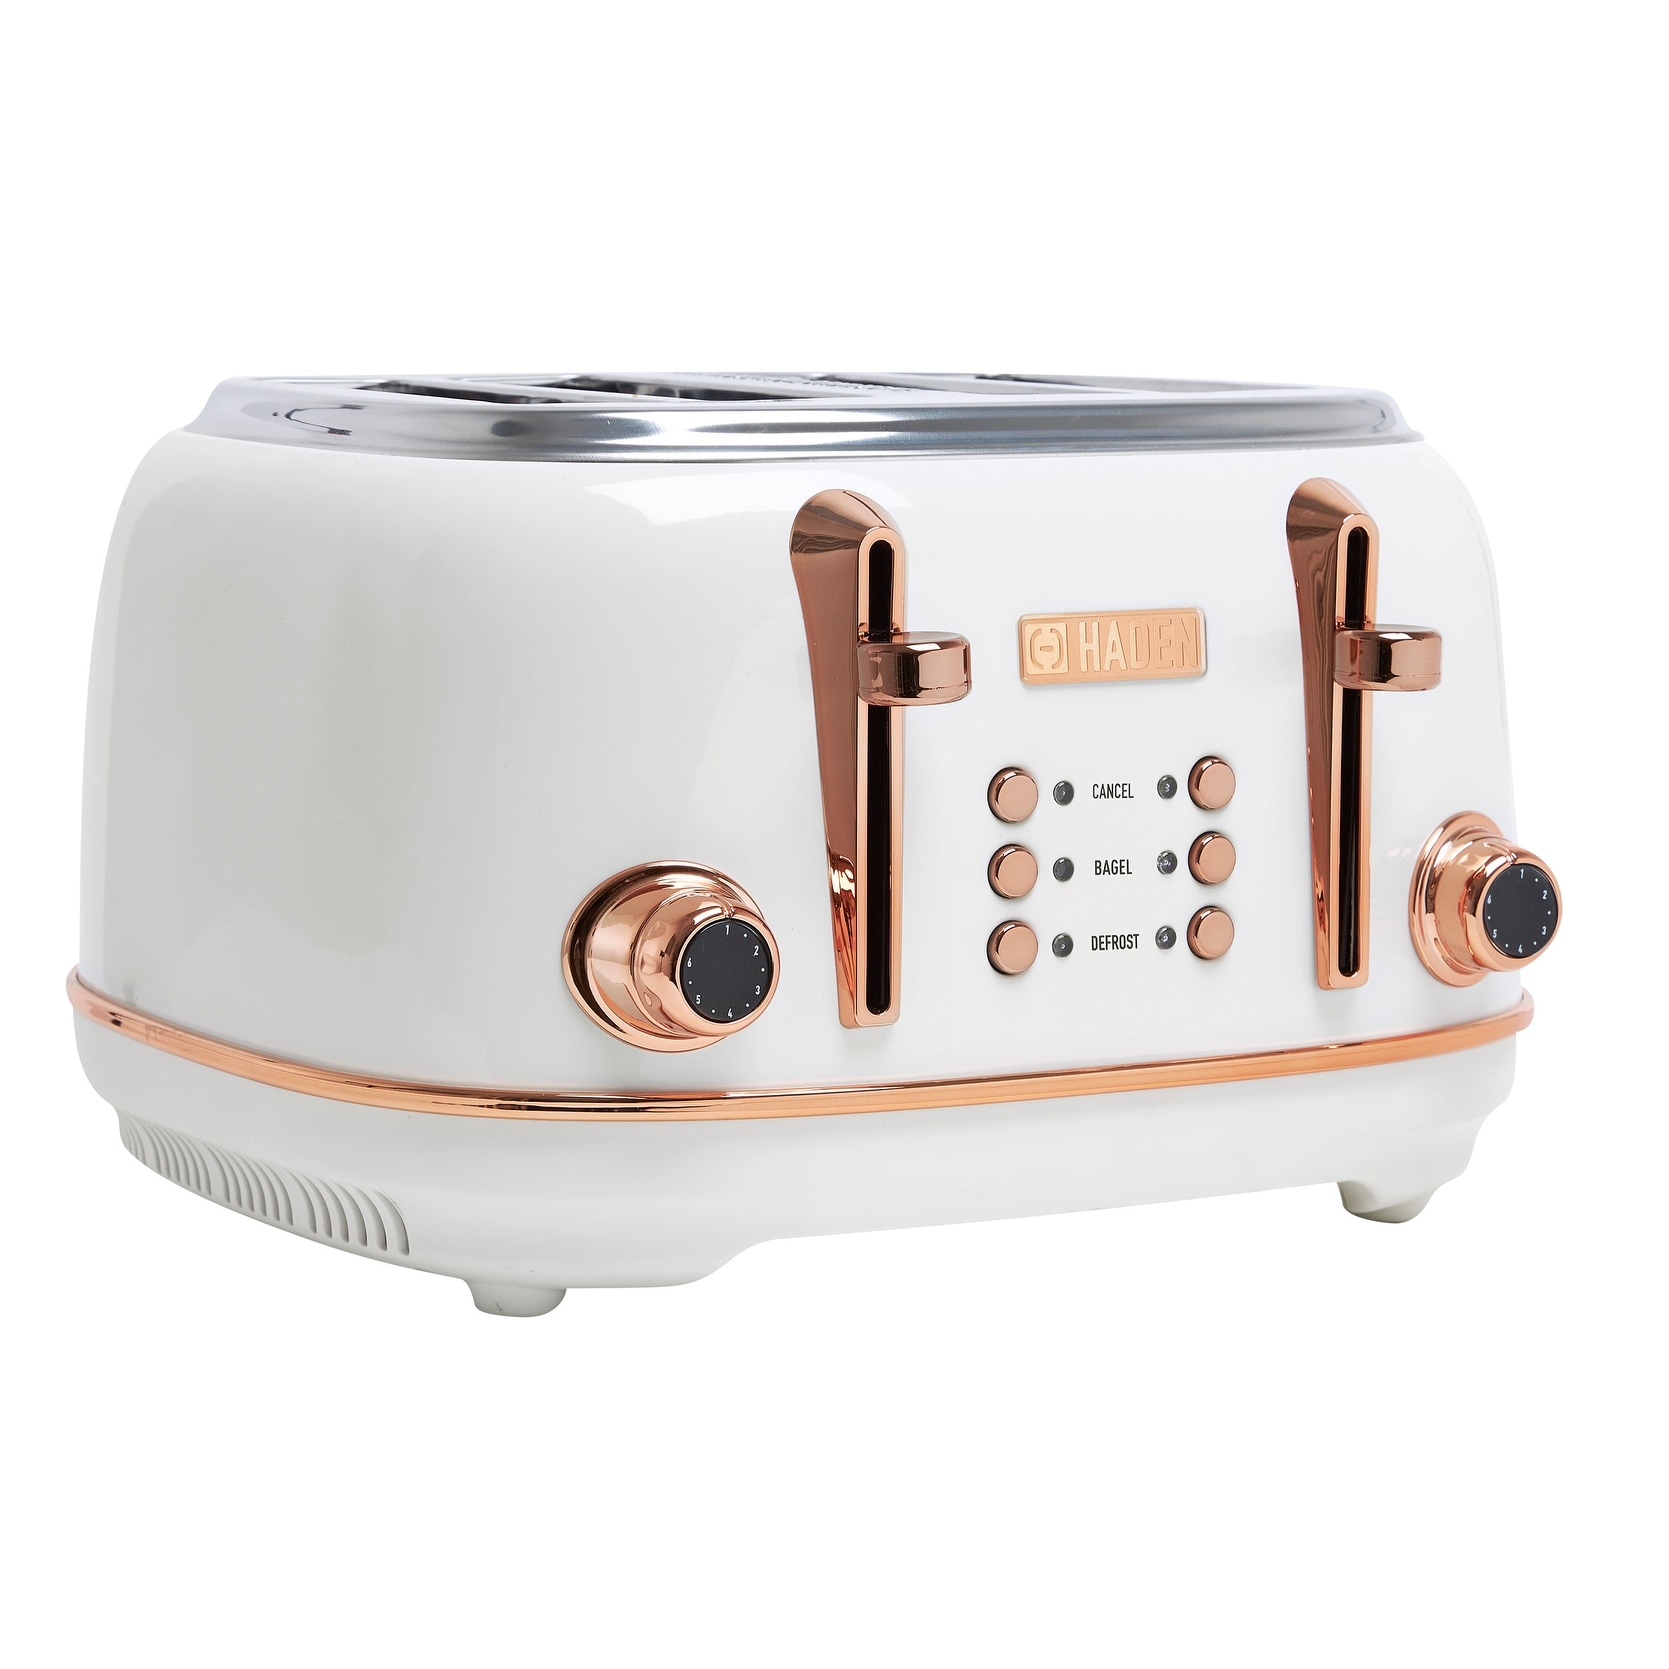 https://ak1.ostkcdn.com/images/products/is/images/direct/0a6dc230458548db1cb257932ef6ee8d6be79702/Haden-Heritage-4-Slice%2C-Wide-Slot-Toaster.jpg